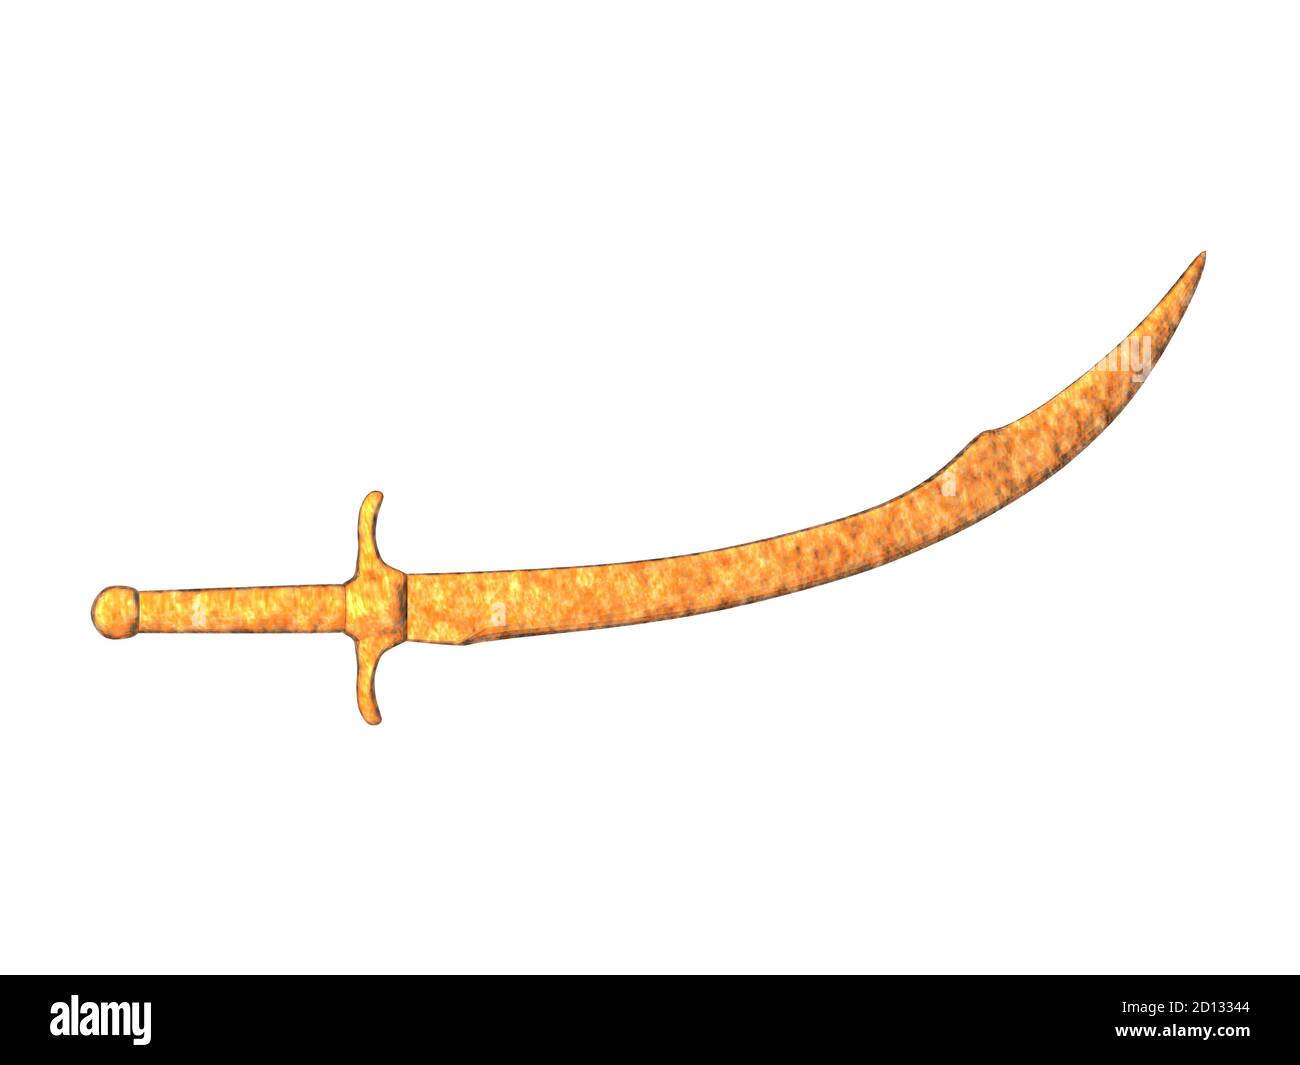 Crossed swords Cut Out Stock Images & Pictures - Alamy